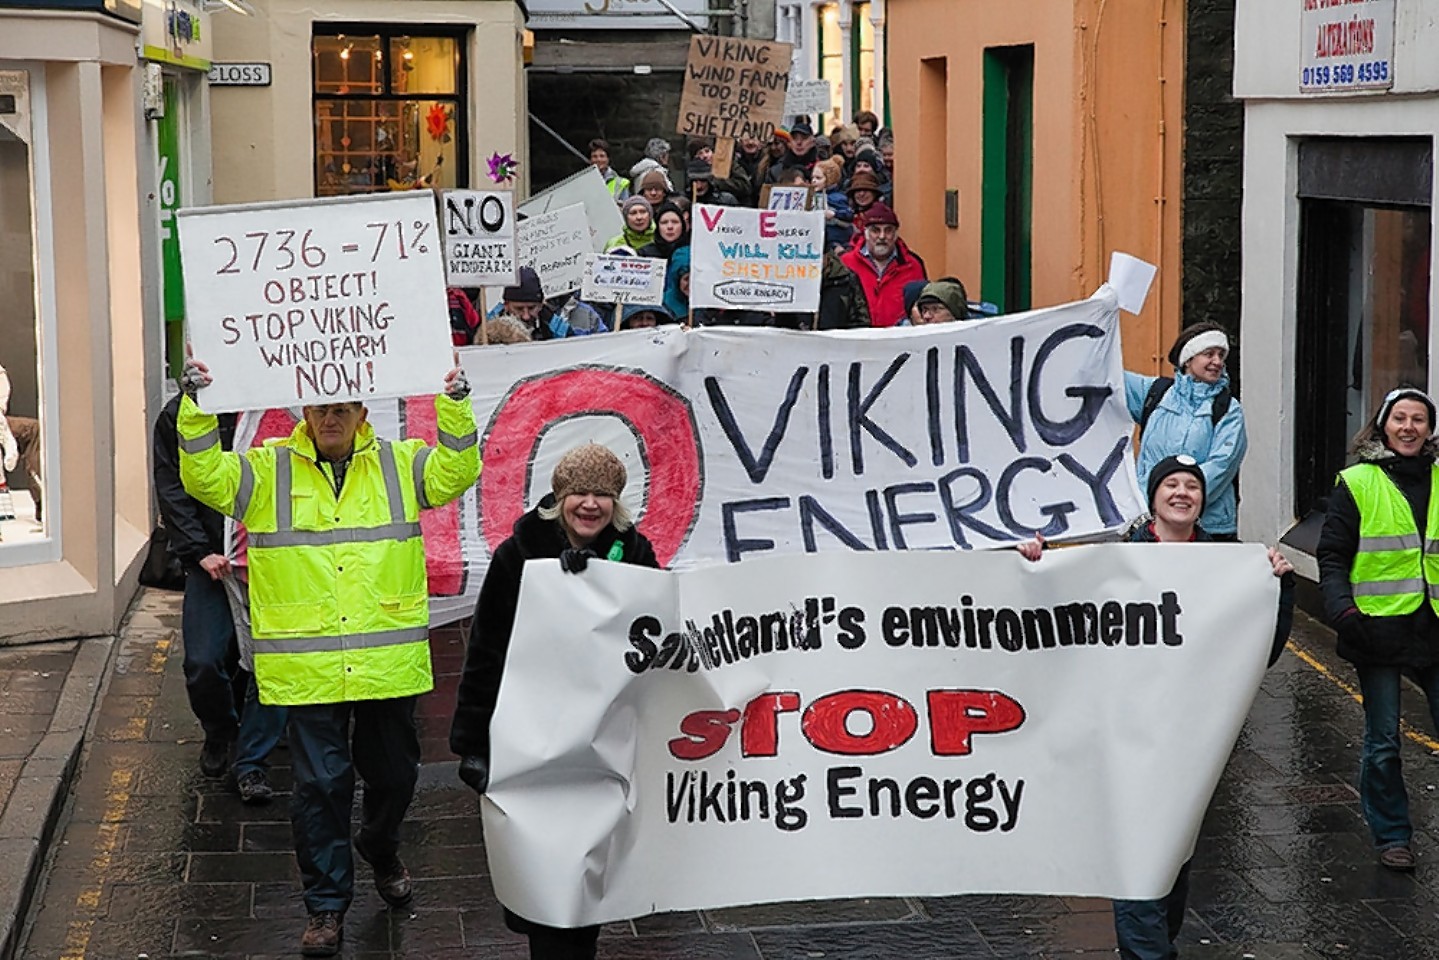 Hundreds of people protested against the windfarm in 2012